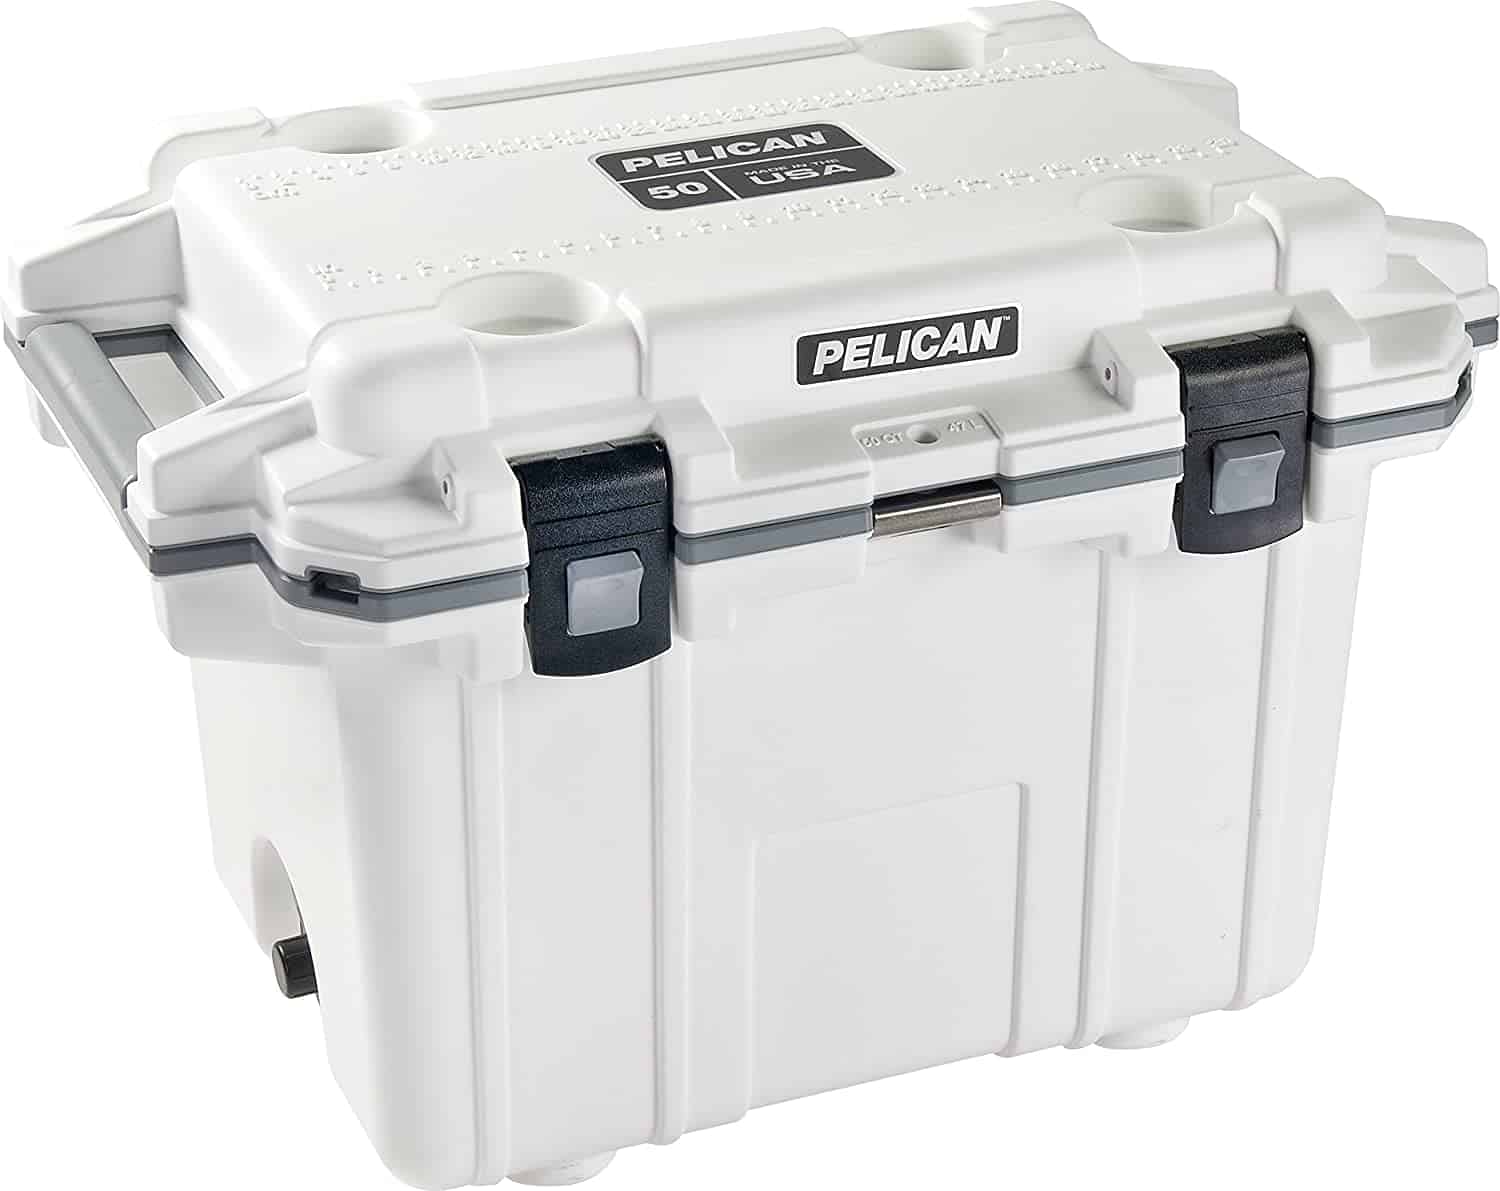 Top 10 Best Fishing Coolers Reviews Best Camping Coolers For Family!